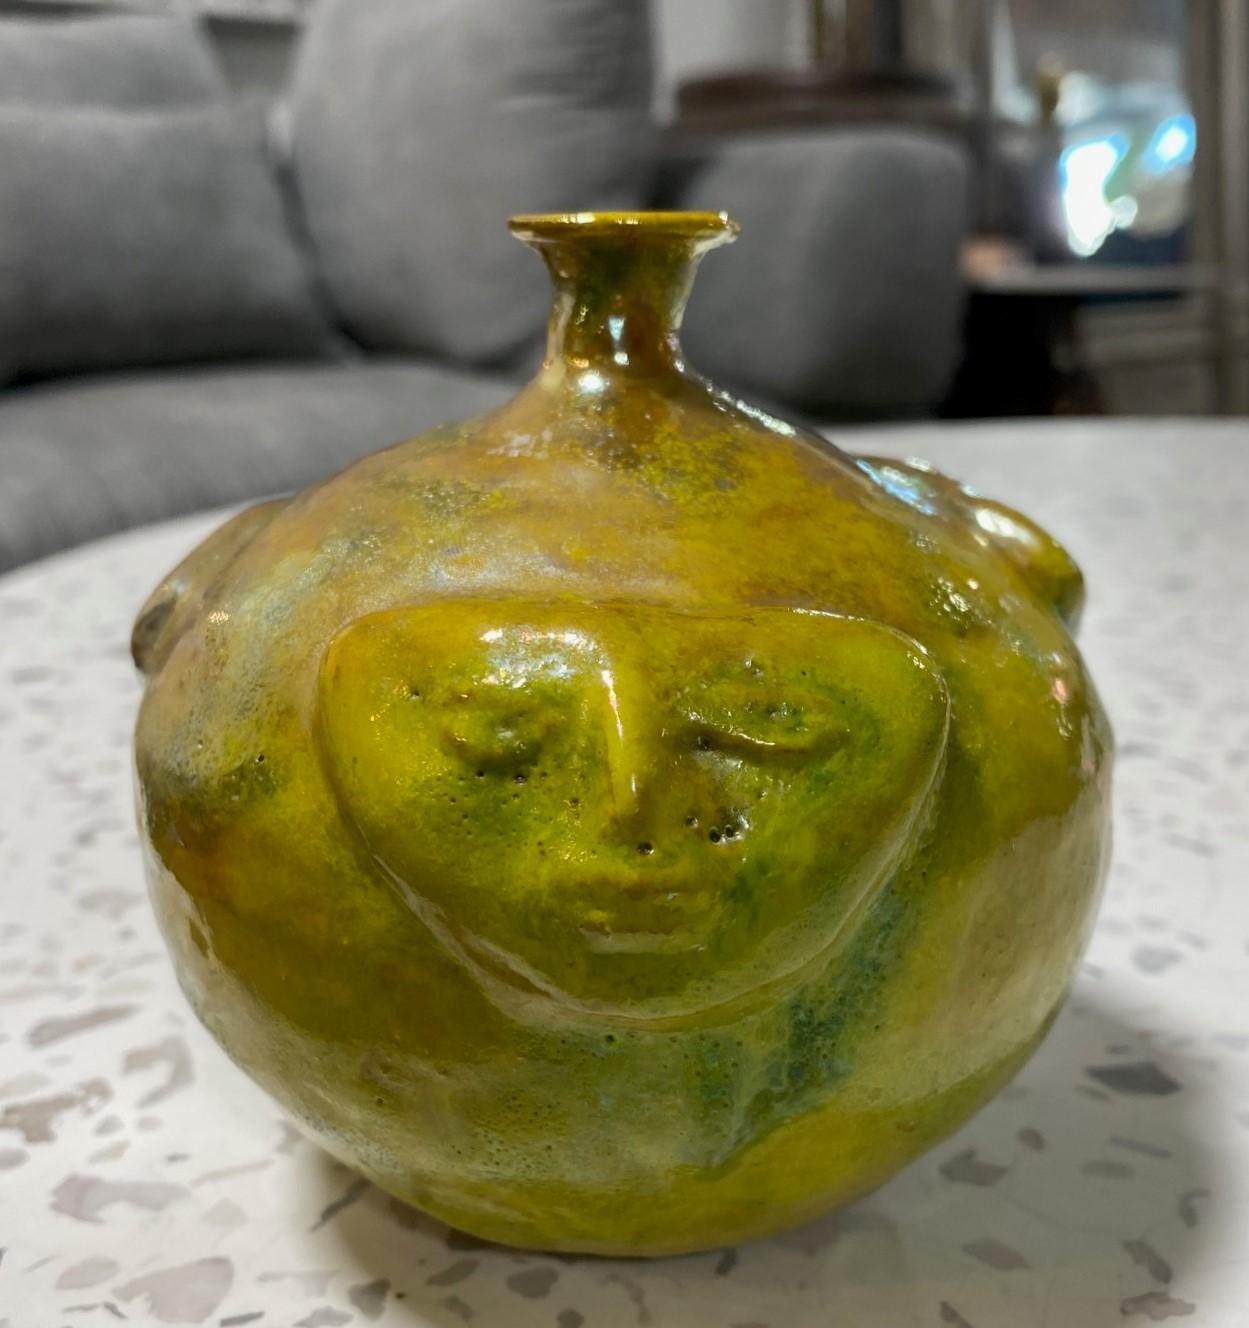 A wonderful gem of a piece by famed American/California ceramicist Beatrice Wood featuring her highly coveted iridescent luster glaze and highly desired face design. The gorgeous and sumptuous glaze radiants various shades and colors (greens,